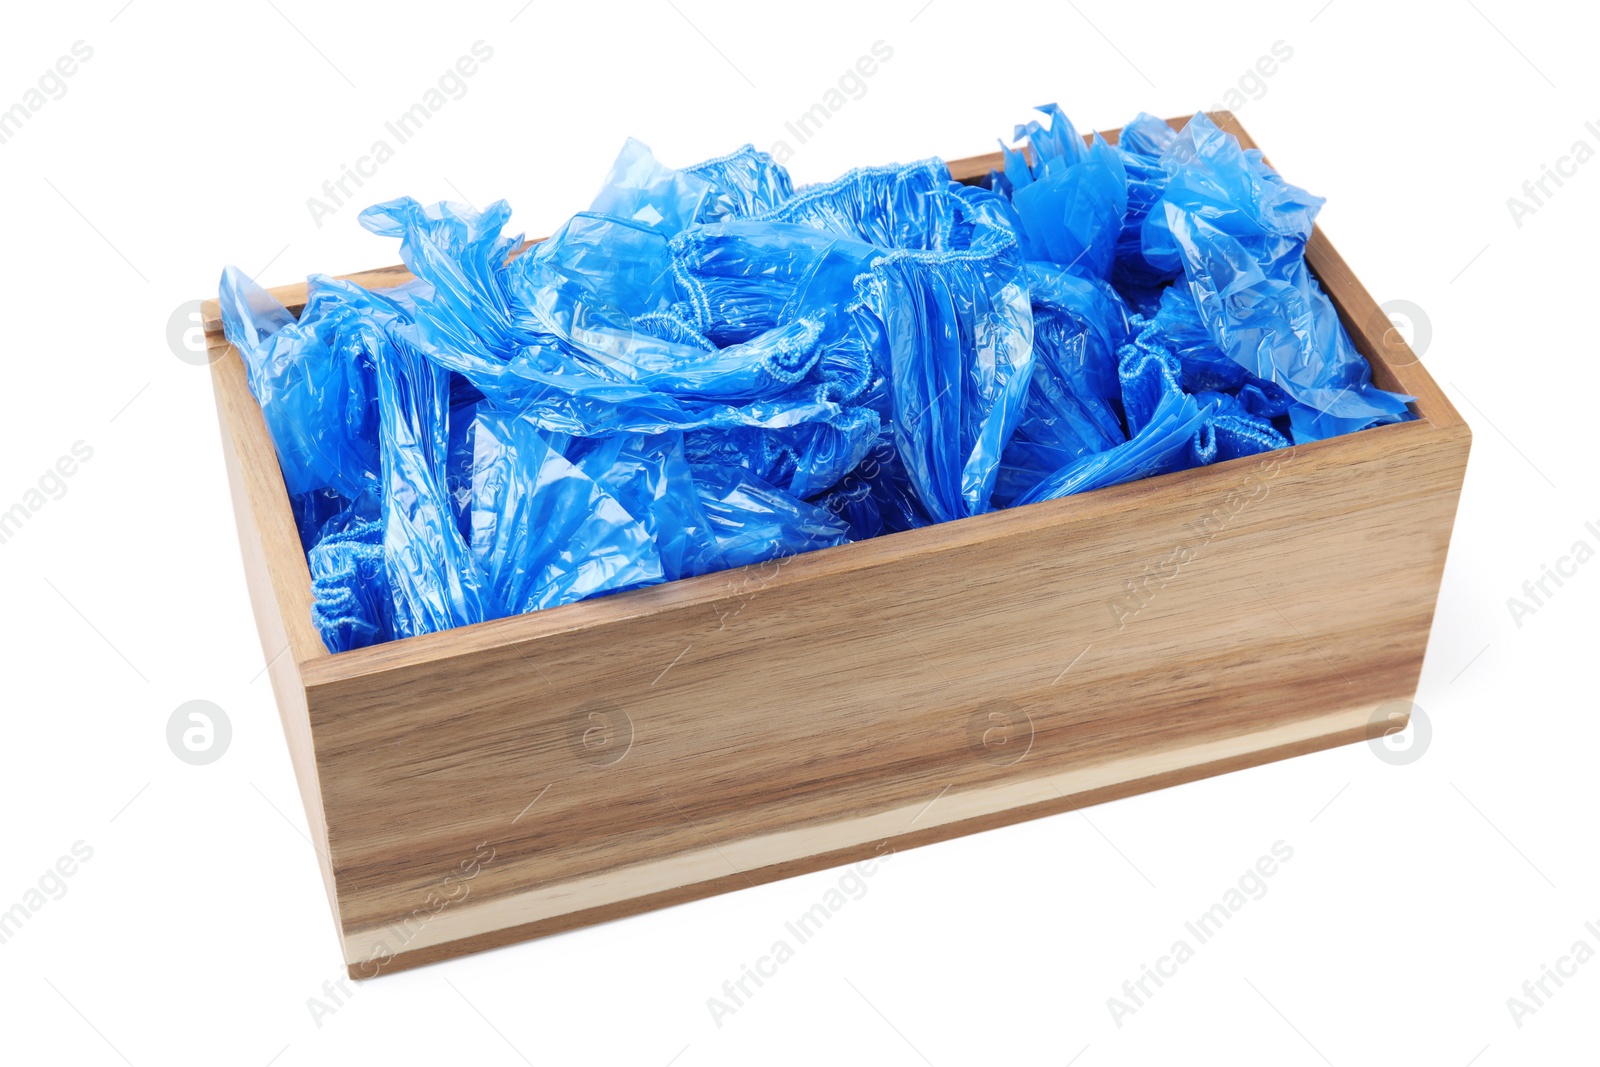 Photo of Blue medical shoe covers in wooden crate isolated on white